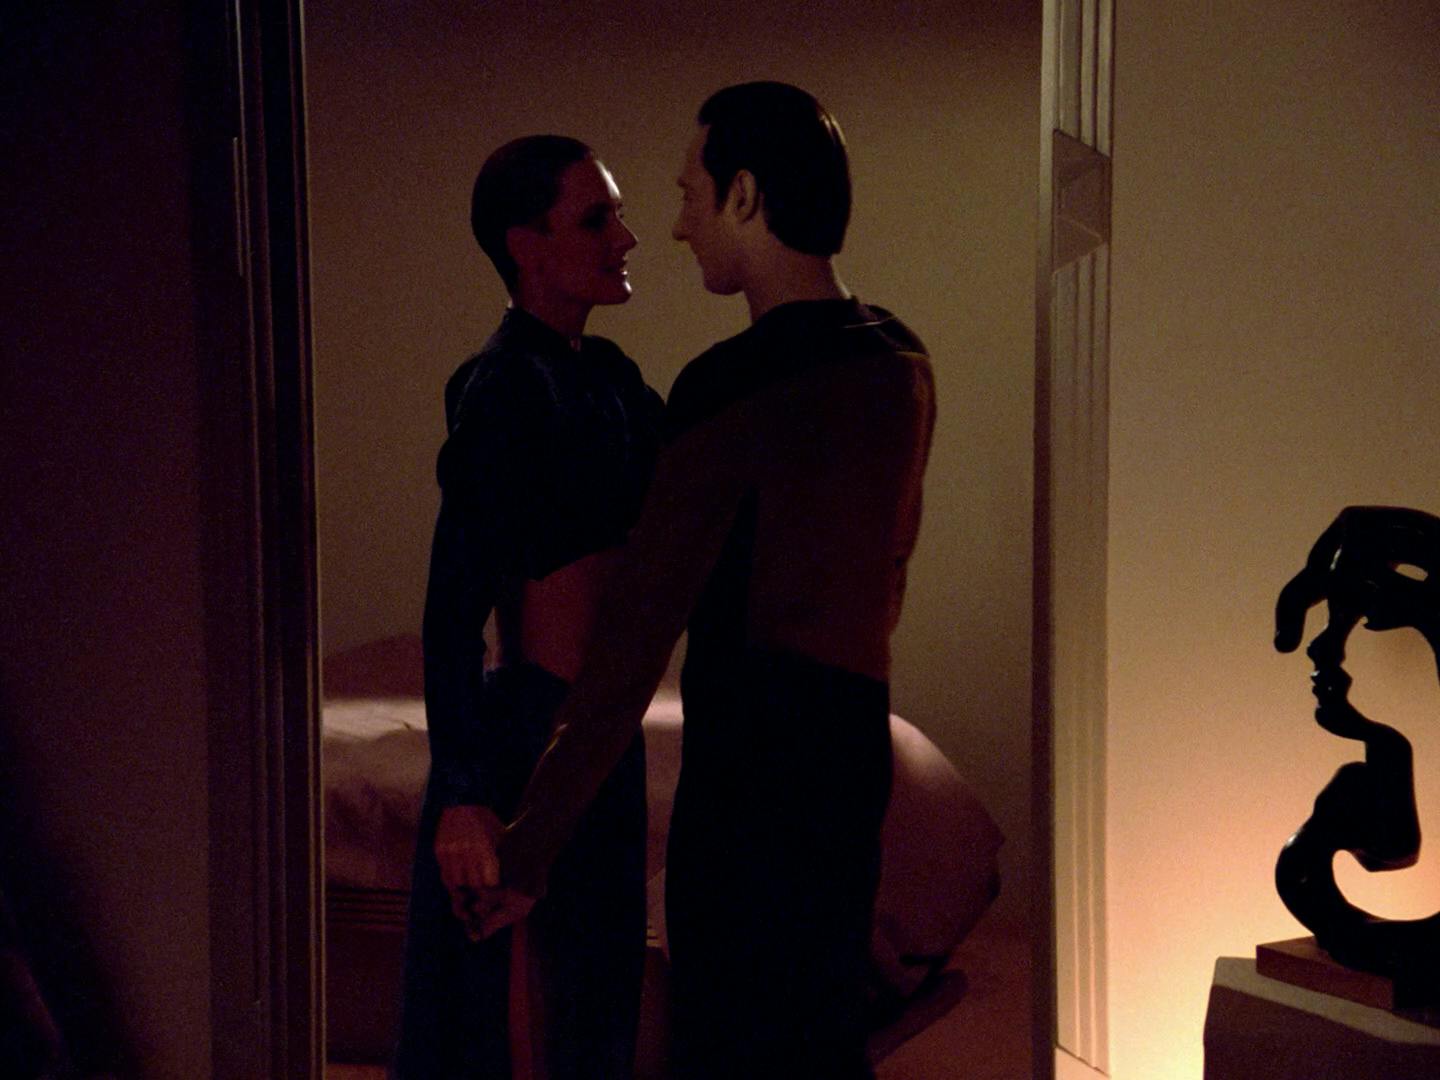 Data stands face-to-face with a lustful Tasha Yar in the doorway of her quarters in 'The Naked Now'